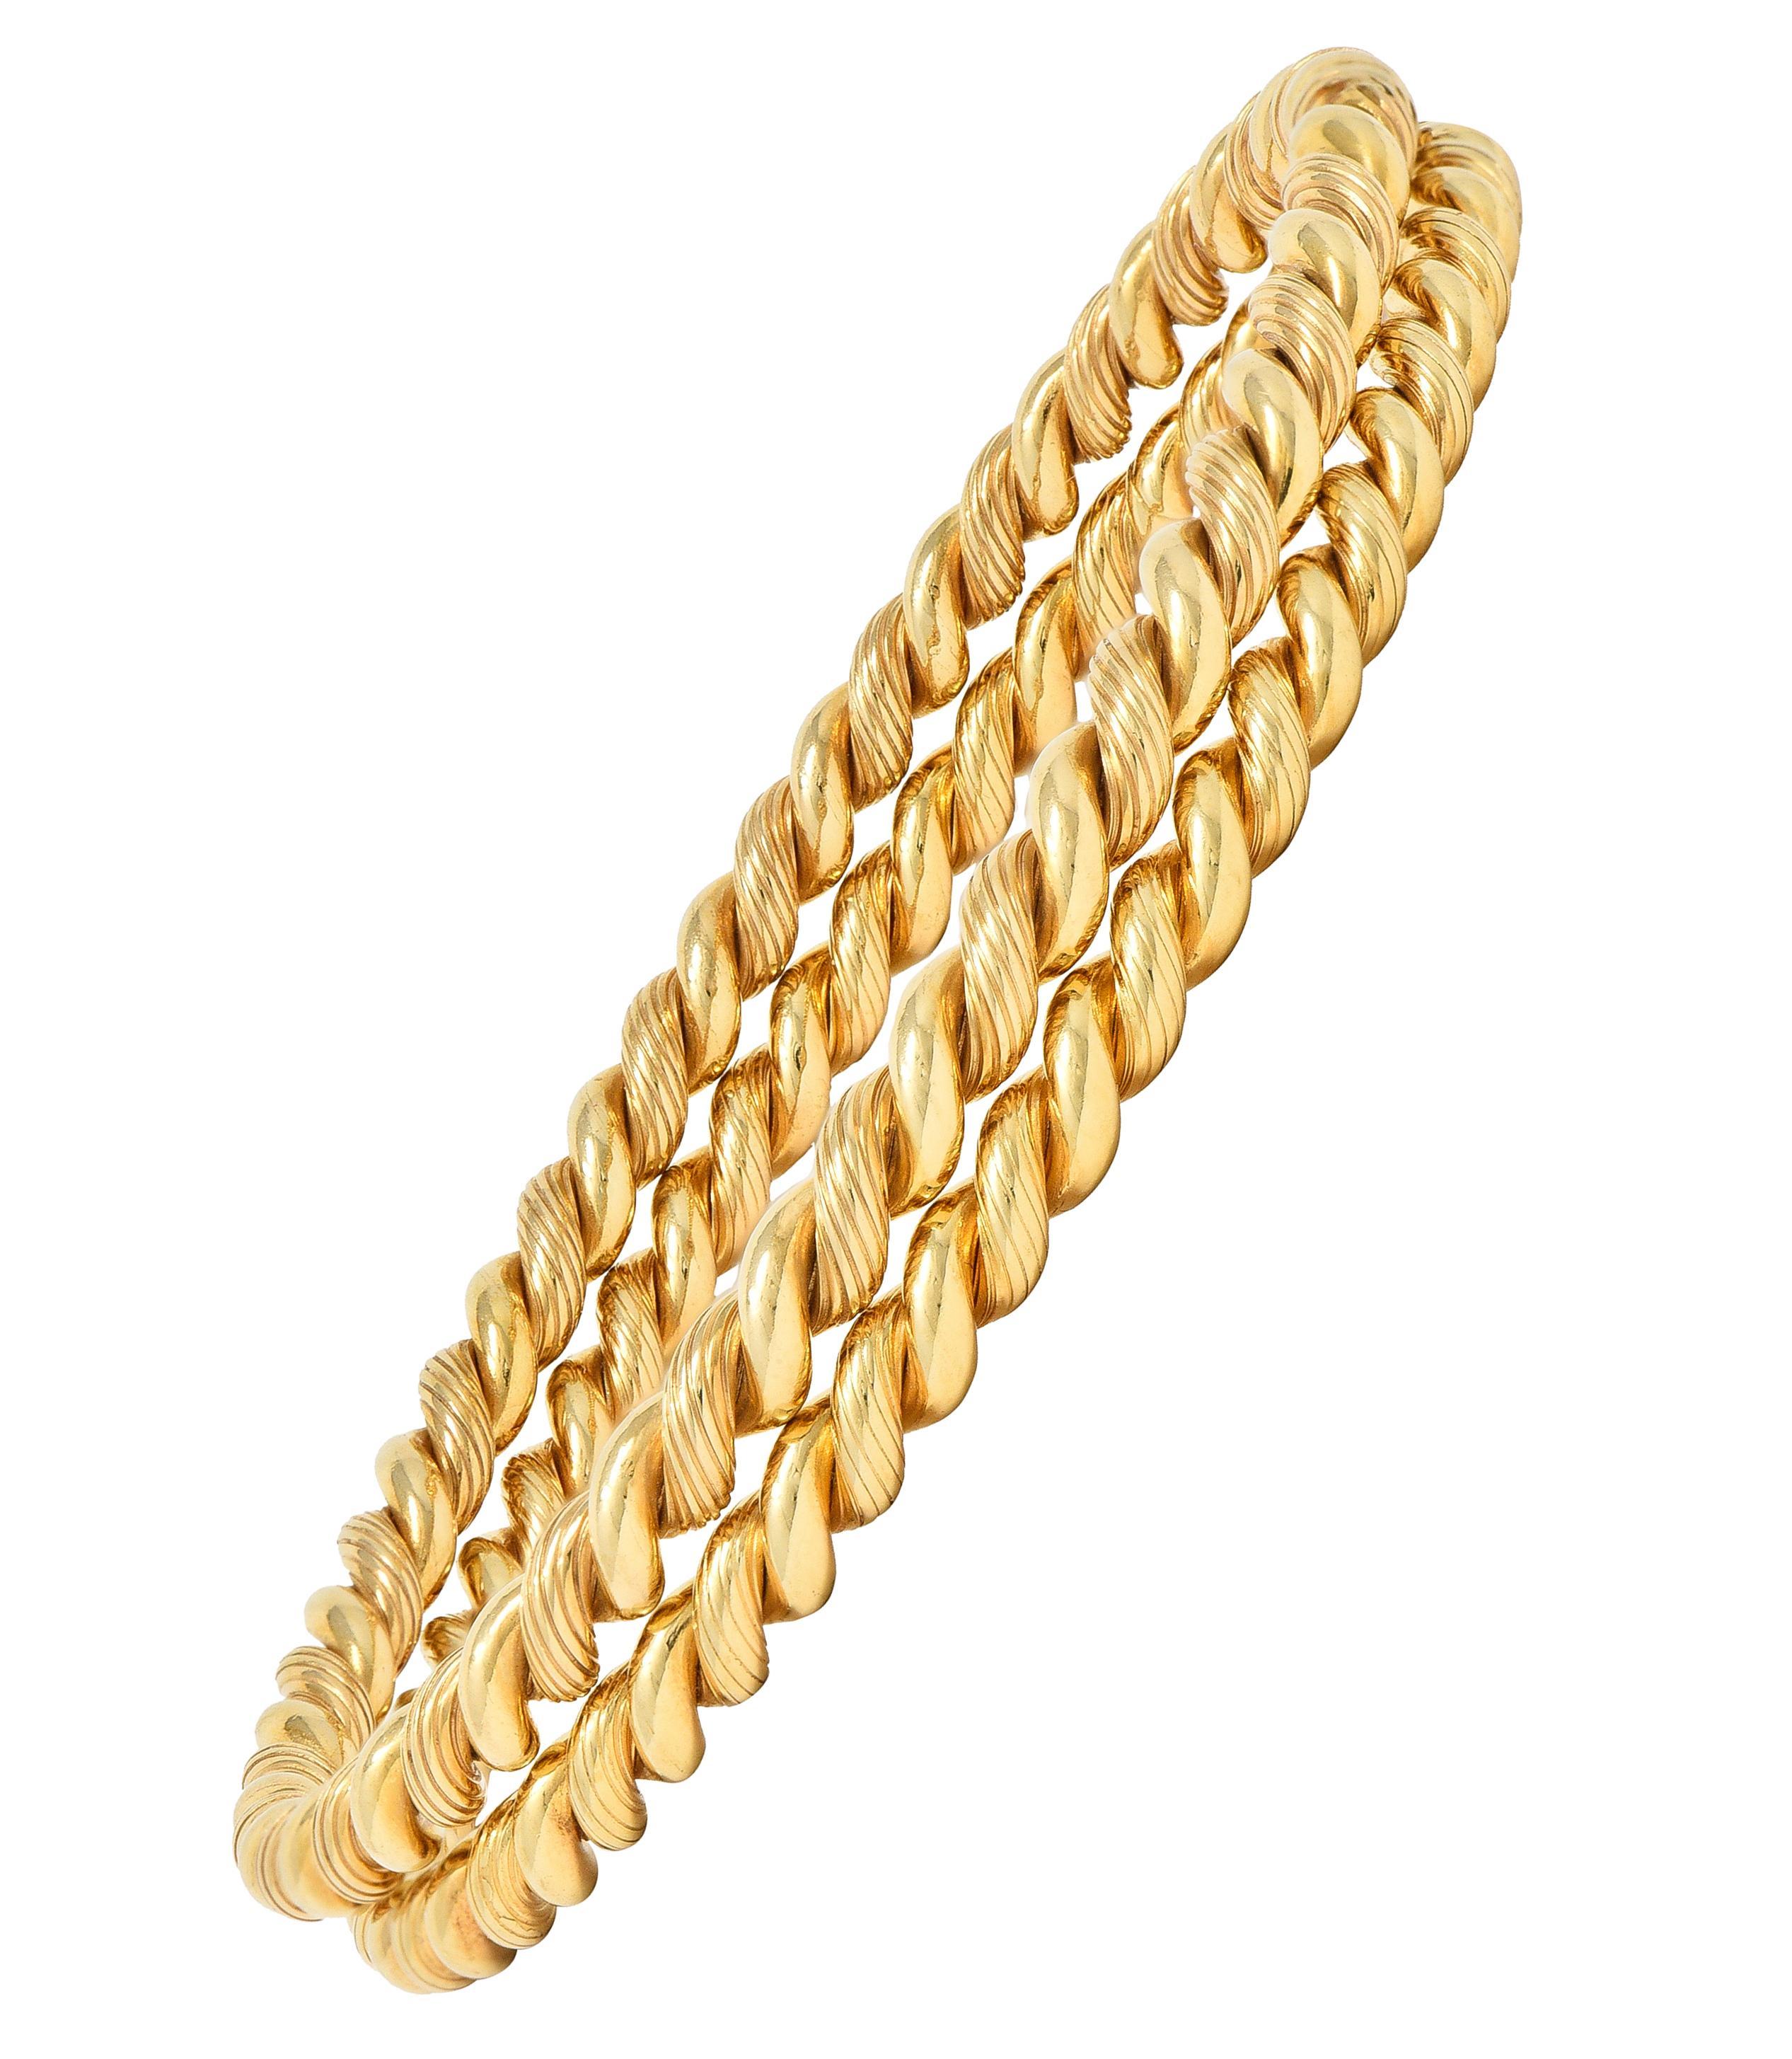 Designed as a set of round twisted rope motif bangles
Featuring twisted, smooth and textured segments
With a high polish finish
Stamped for 14 karat gold 
Signed for Tiffany & Co. 
Circa: 1960s 
Width at widest: 3/16 inch
Bracelet size: 7 3/4 inch